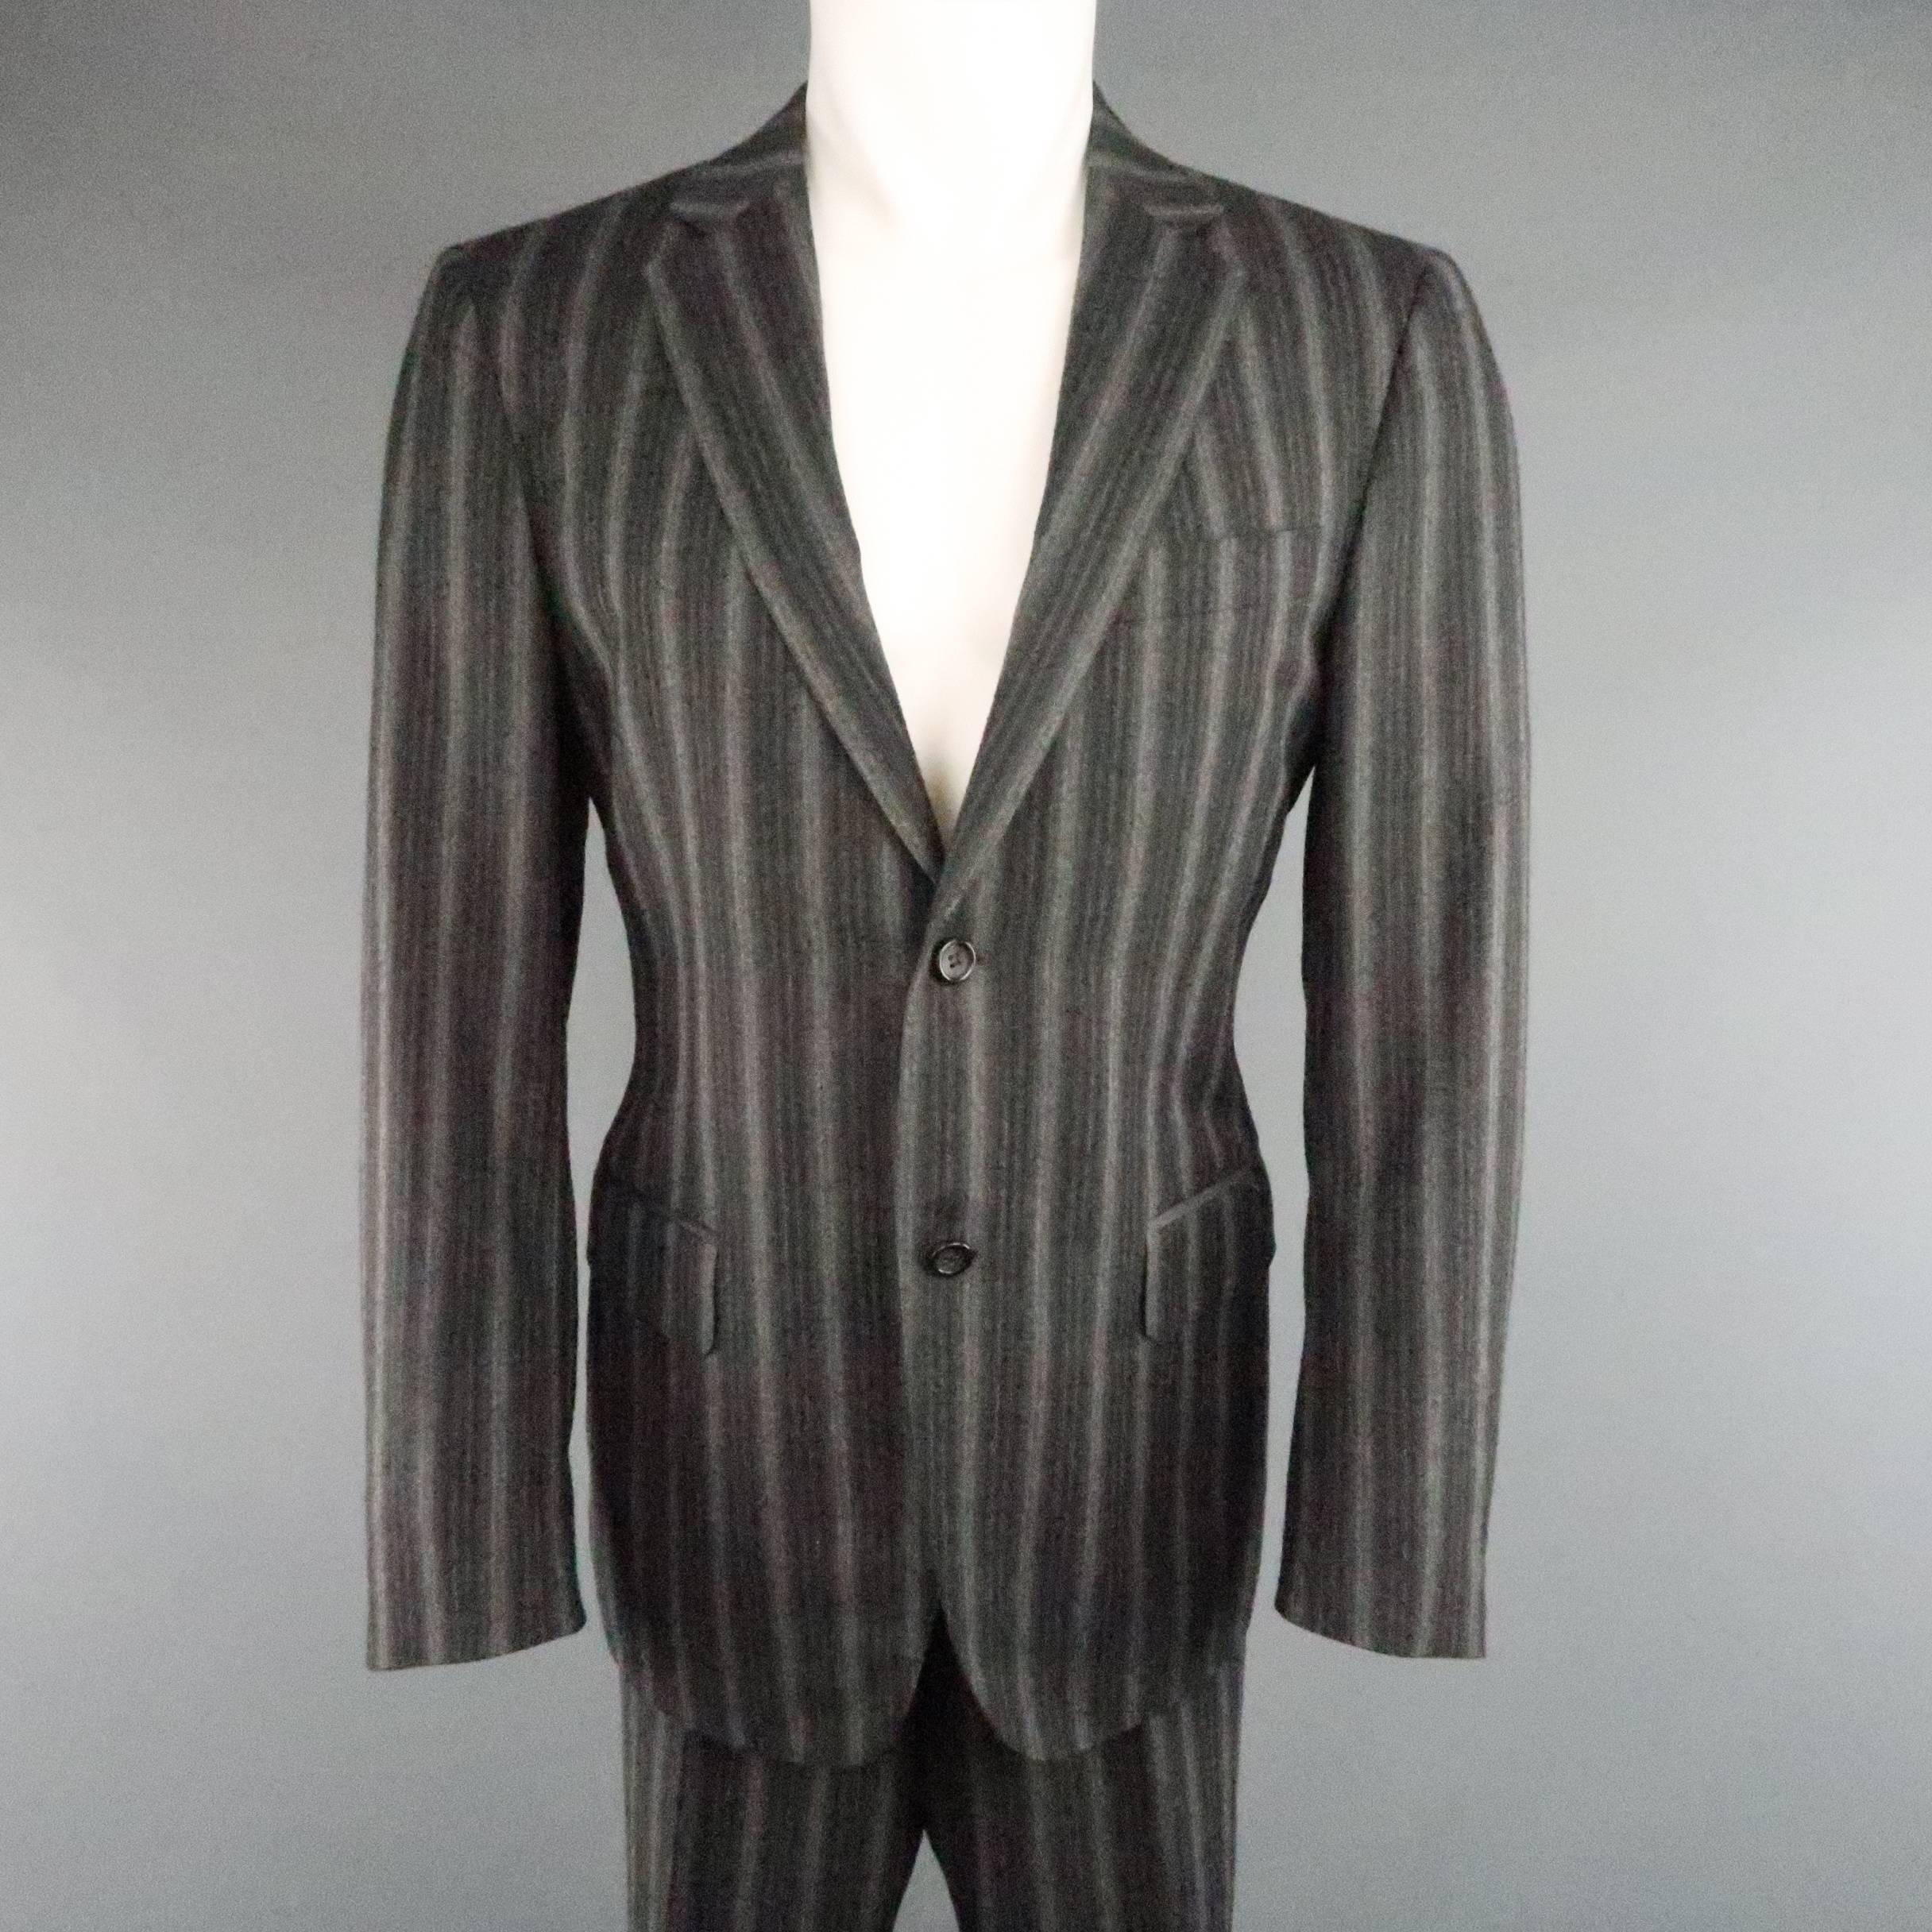 CANALI  two piece suit comes in a unique charcoal to gray gradient pinstripe wool cashmere blend and includes a notch lapel, single breasted, two button sport coat and matching flat front trousers. Made in Italy.
 
Excellent Pre-Owned